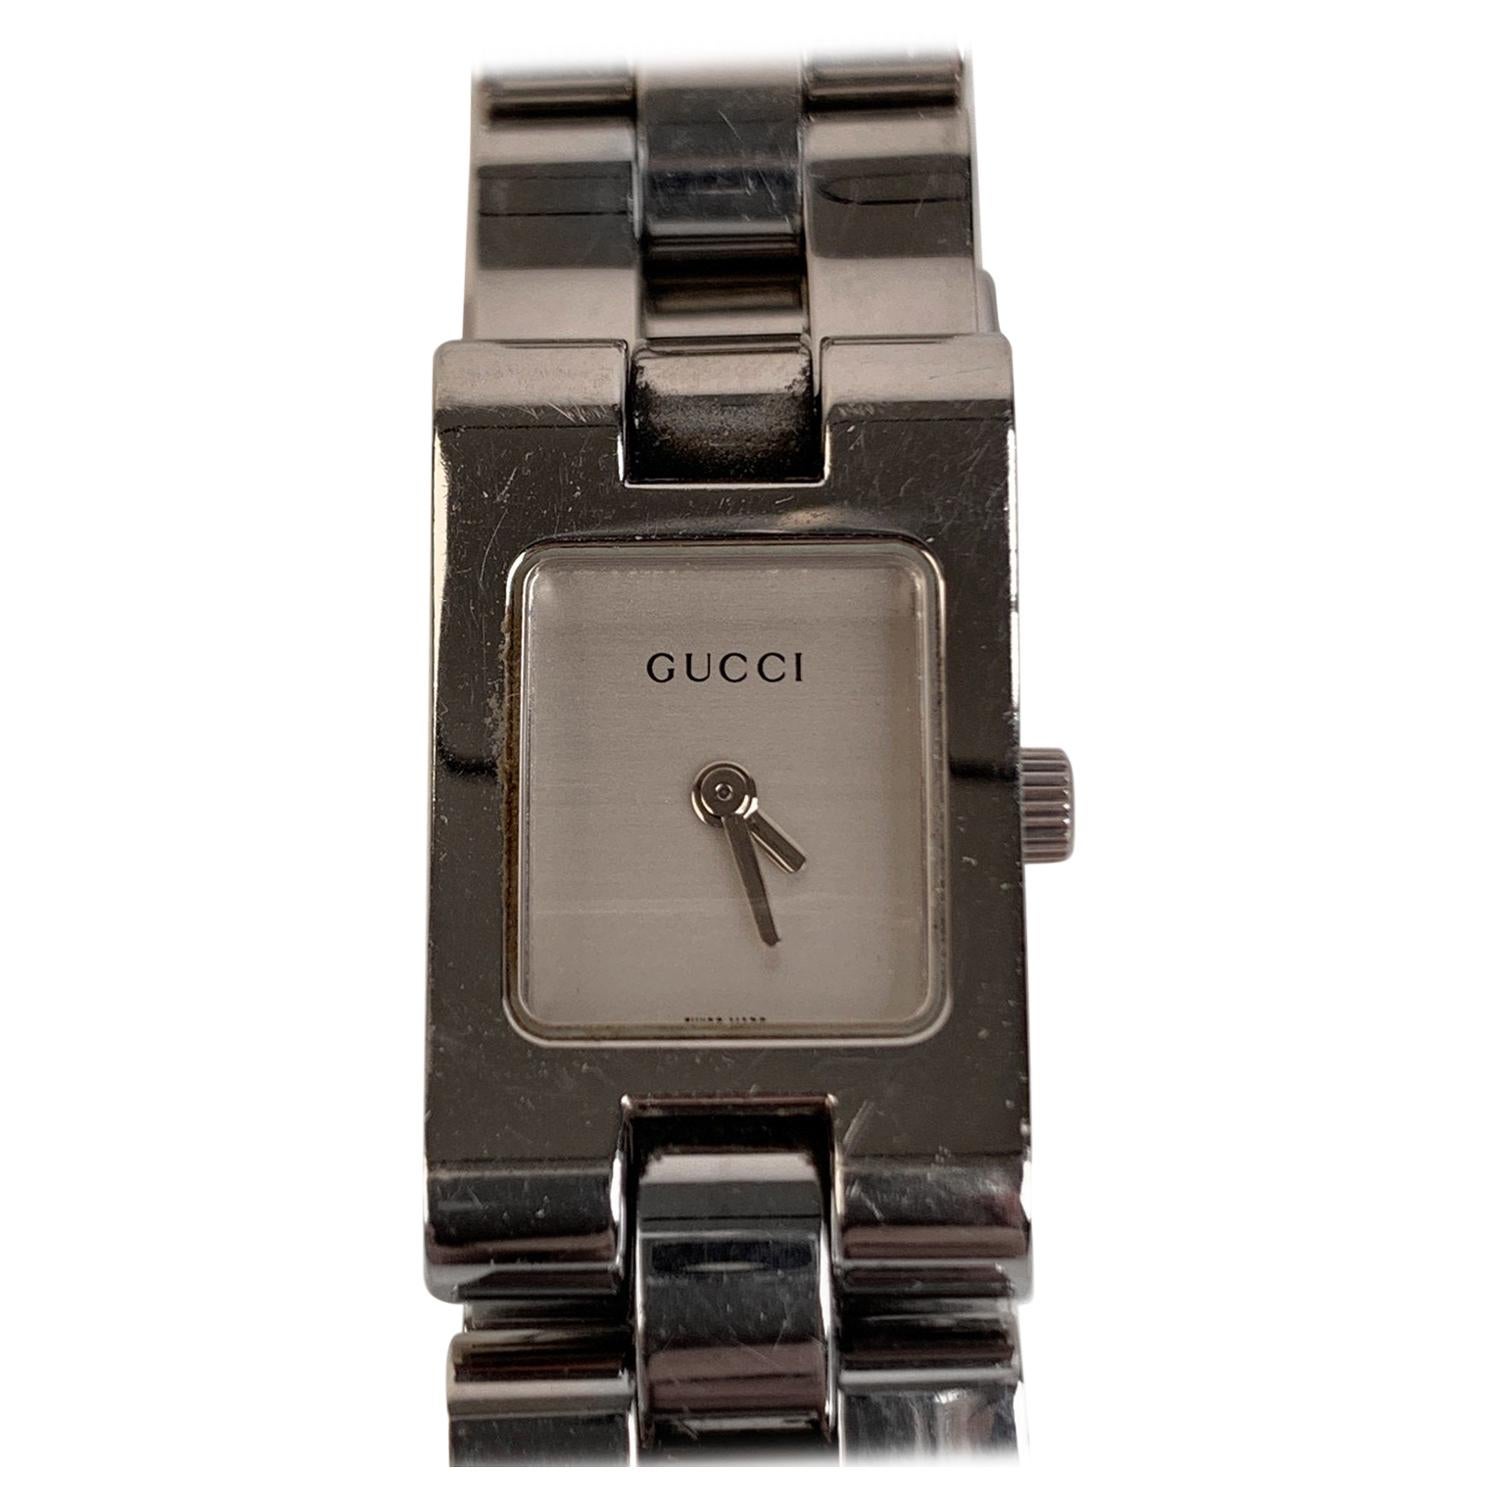 Gucci Stainless Steel Mod 2305L Wrist Watch White Dial